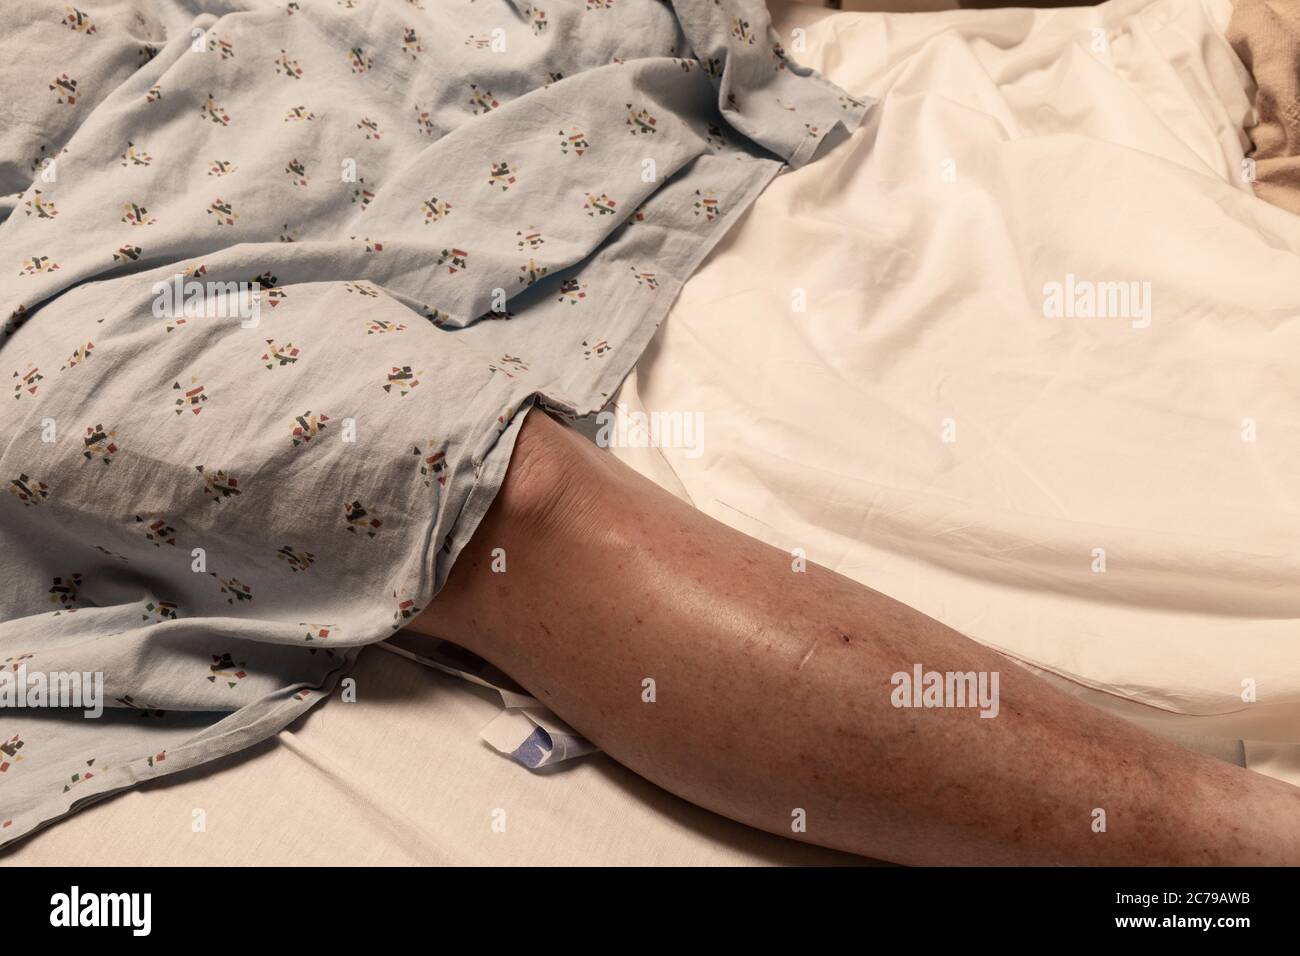 Single leg of an amputee man in a hospital bed partially covered with a gown, disabled, veteran, cancer, coronavirus, healthcare background, horizonta Stock Photo